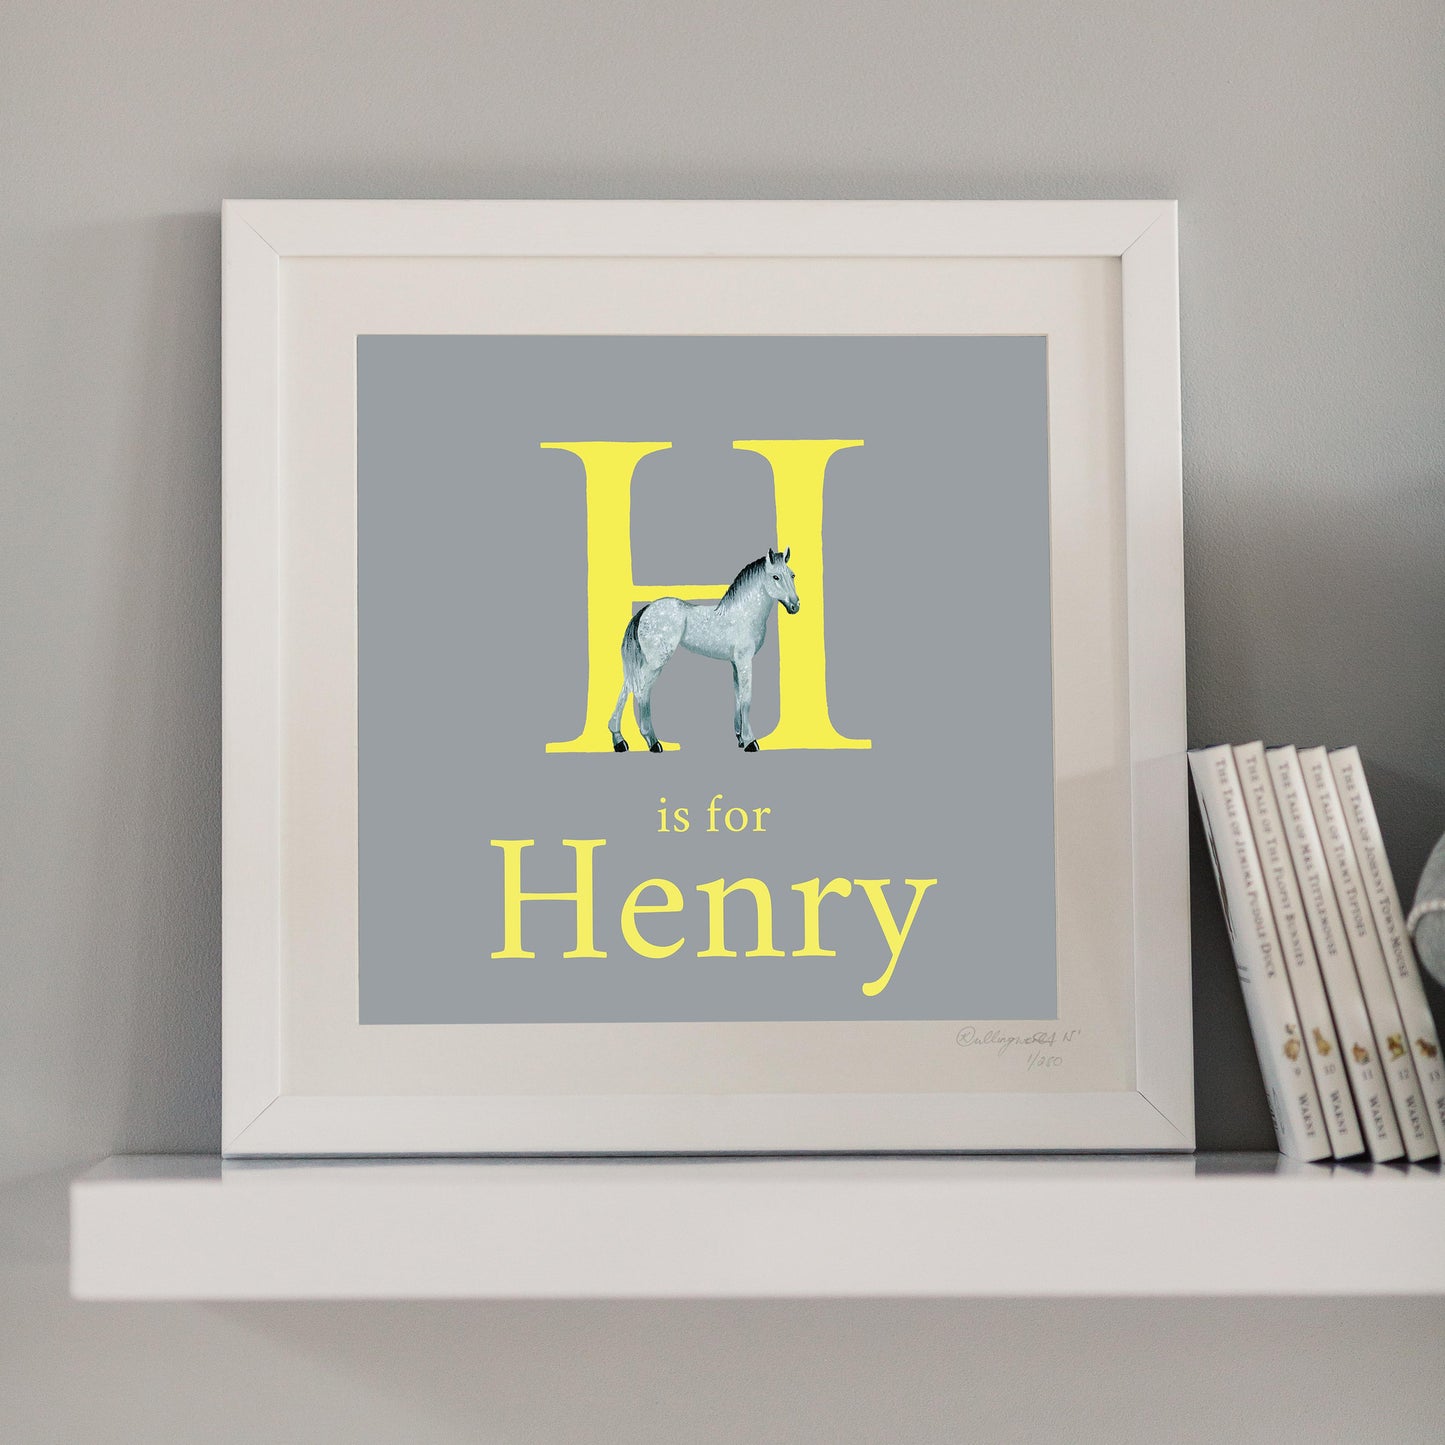 Framed H is for Horse and Henry personalised grey, yellow and white Letter print perfect gift